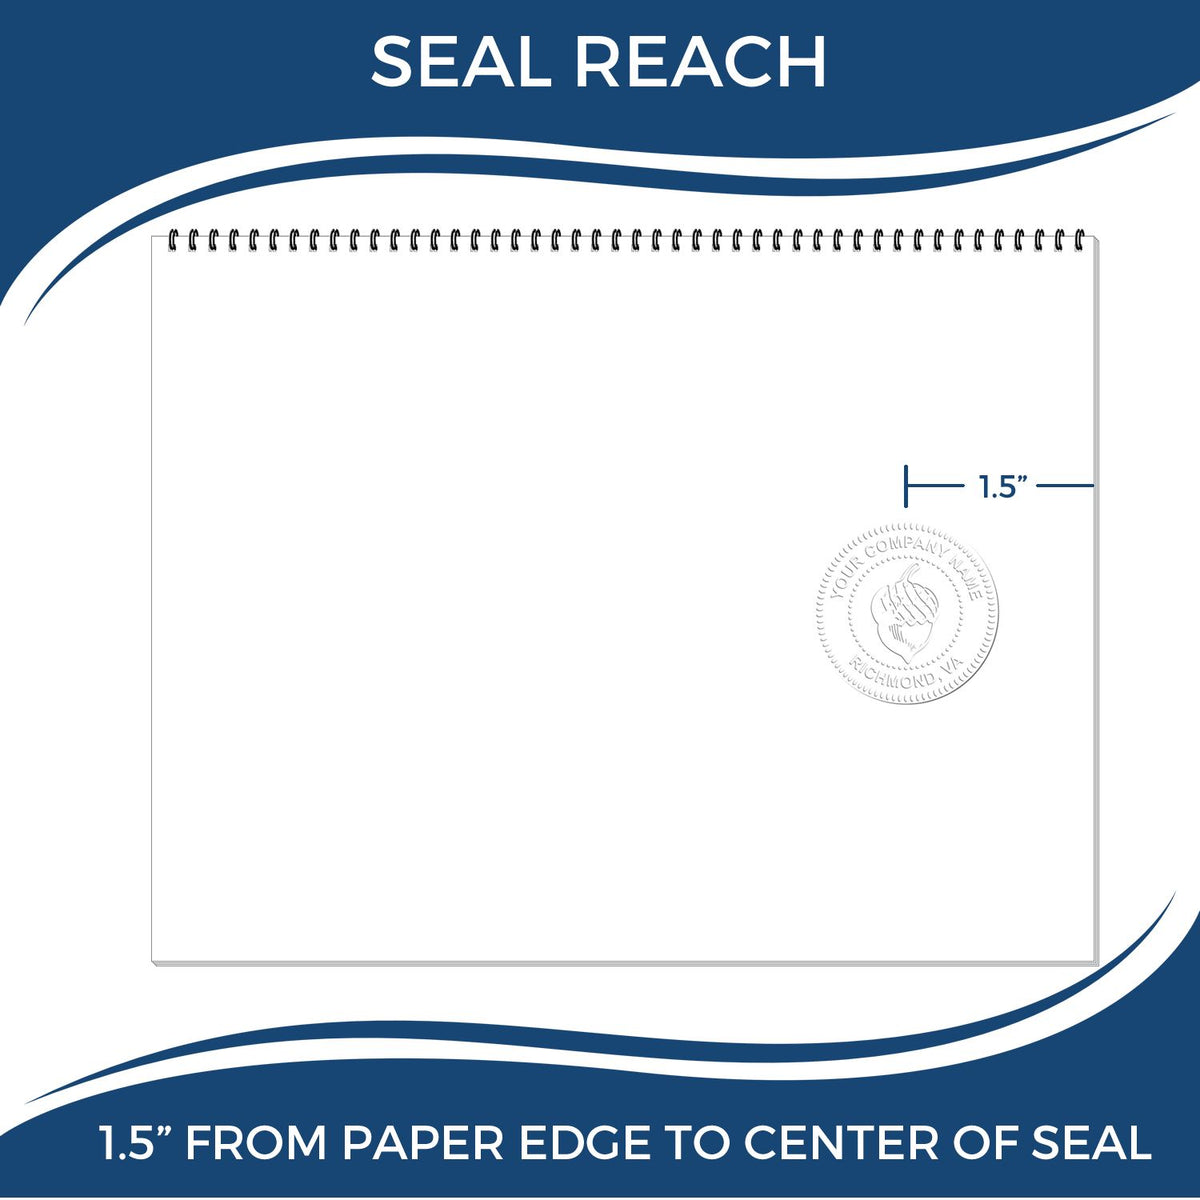 An infographic showing the seal reach which is represented by a ruler and a miniature seal image of the Hybrid Montana Geologist Seal